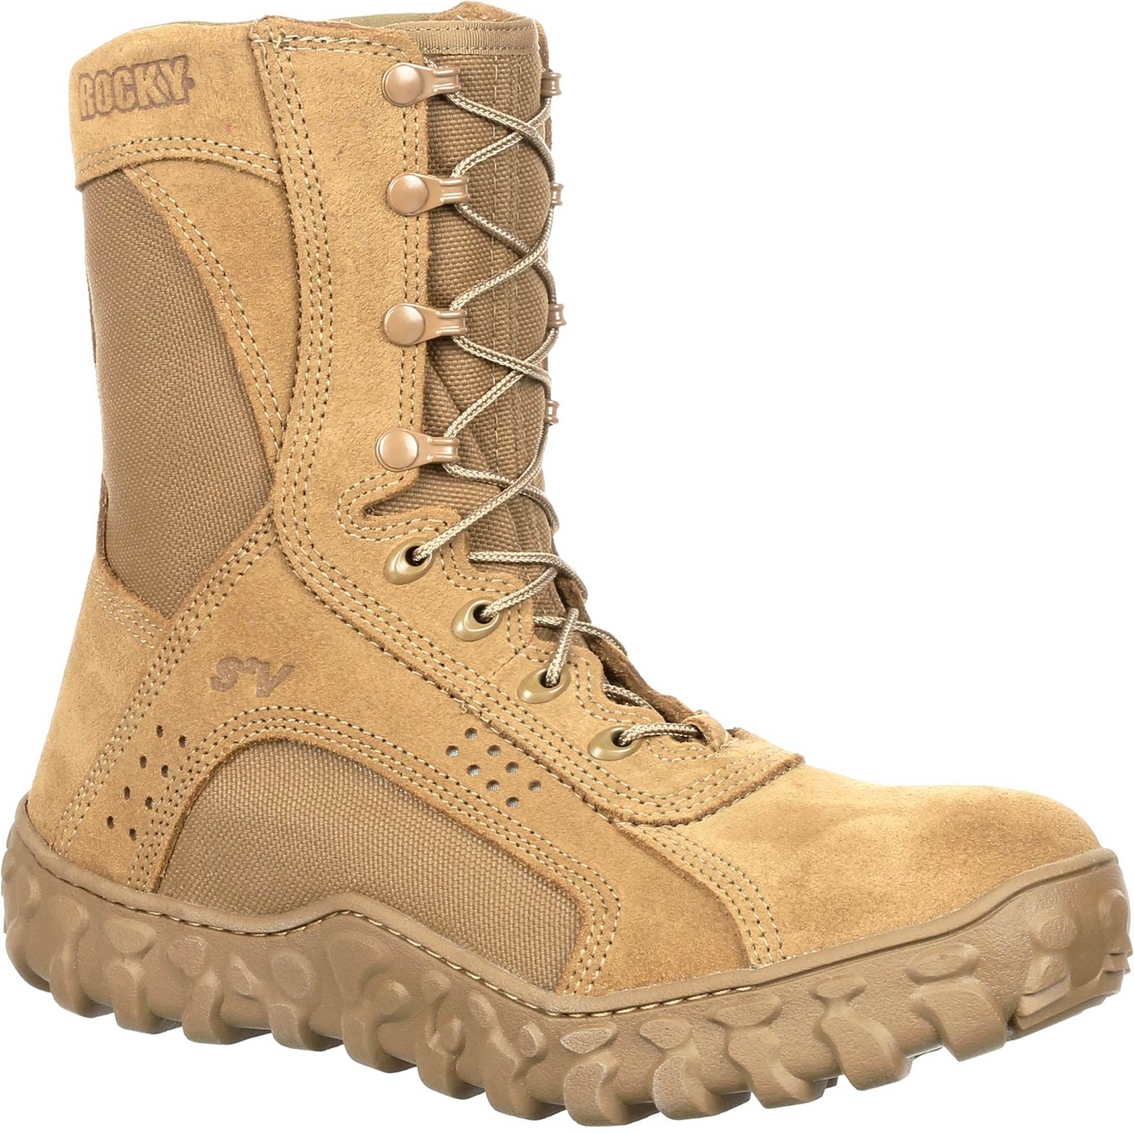 rocky work boots clearance